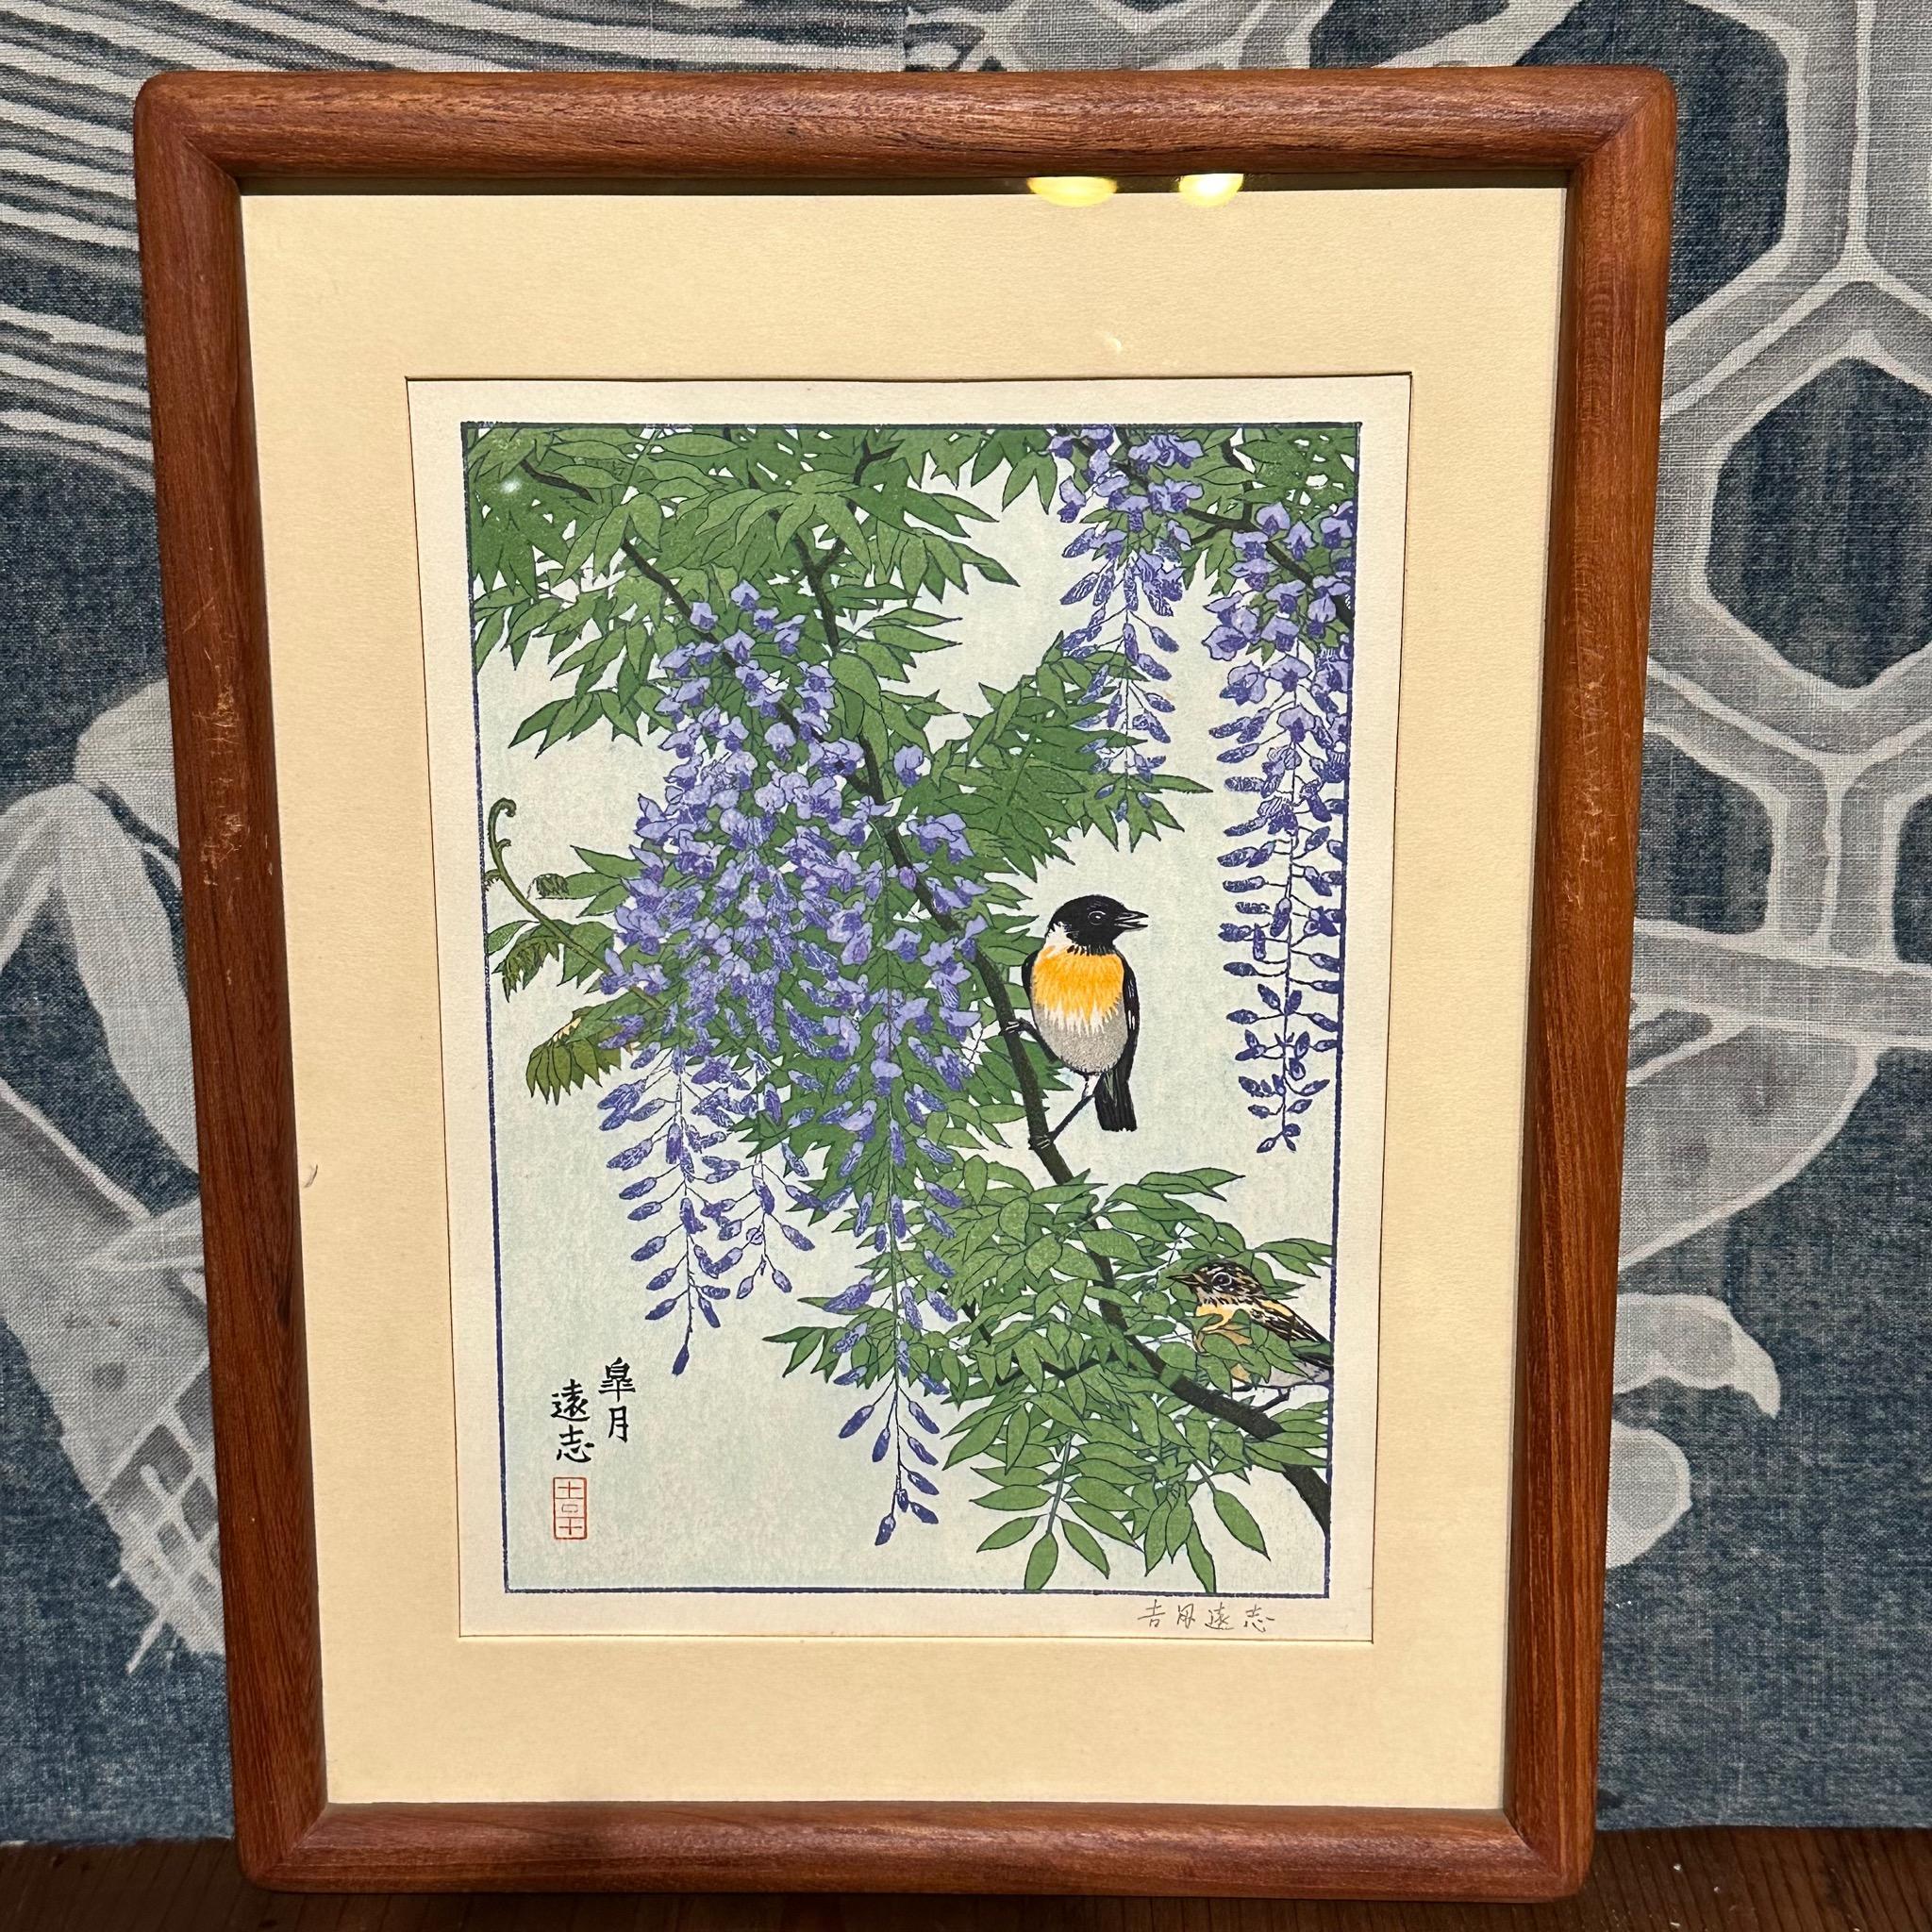 Available from Shogun's Gallery in Portland, Oregon for Over 40 Years Specializing in Asian Arts & Antiques.

The Flowers and Birds of the Oriental Year - Very rare complete set of 12 framed prints, one for each month of the year. All signed by